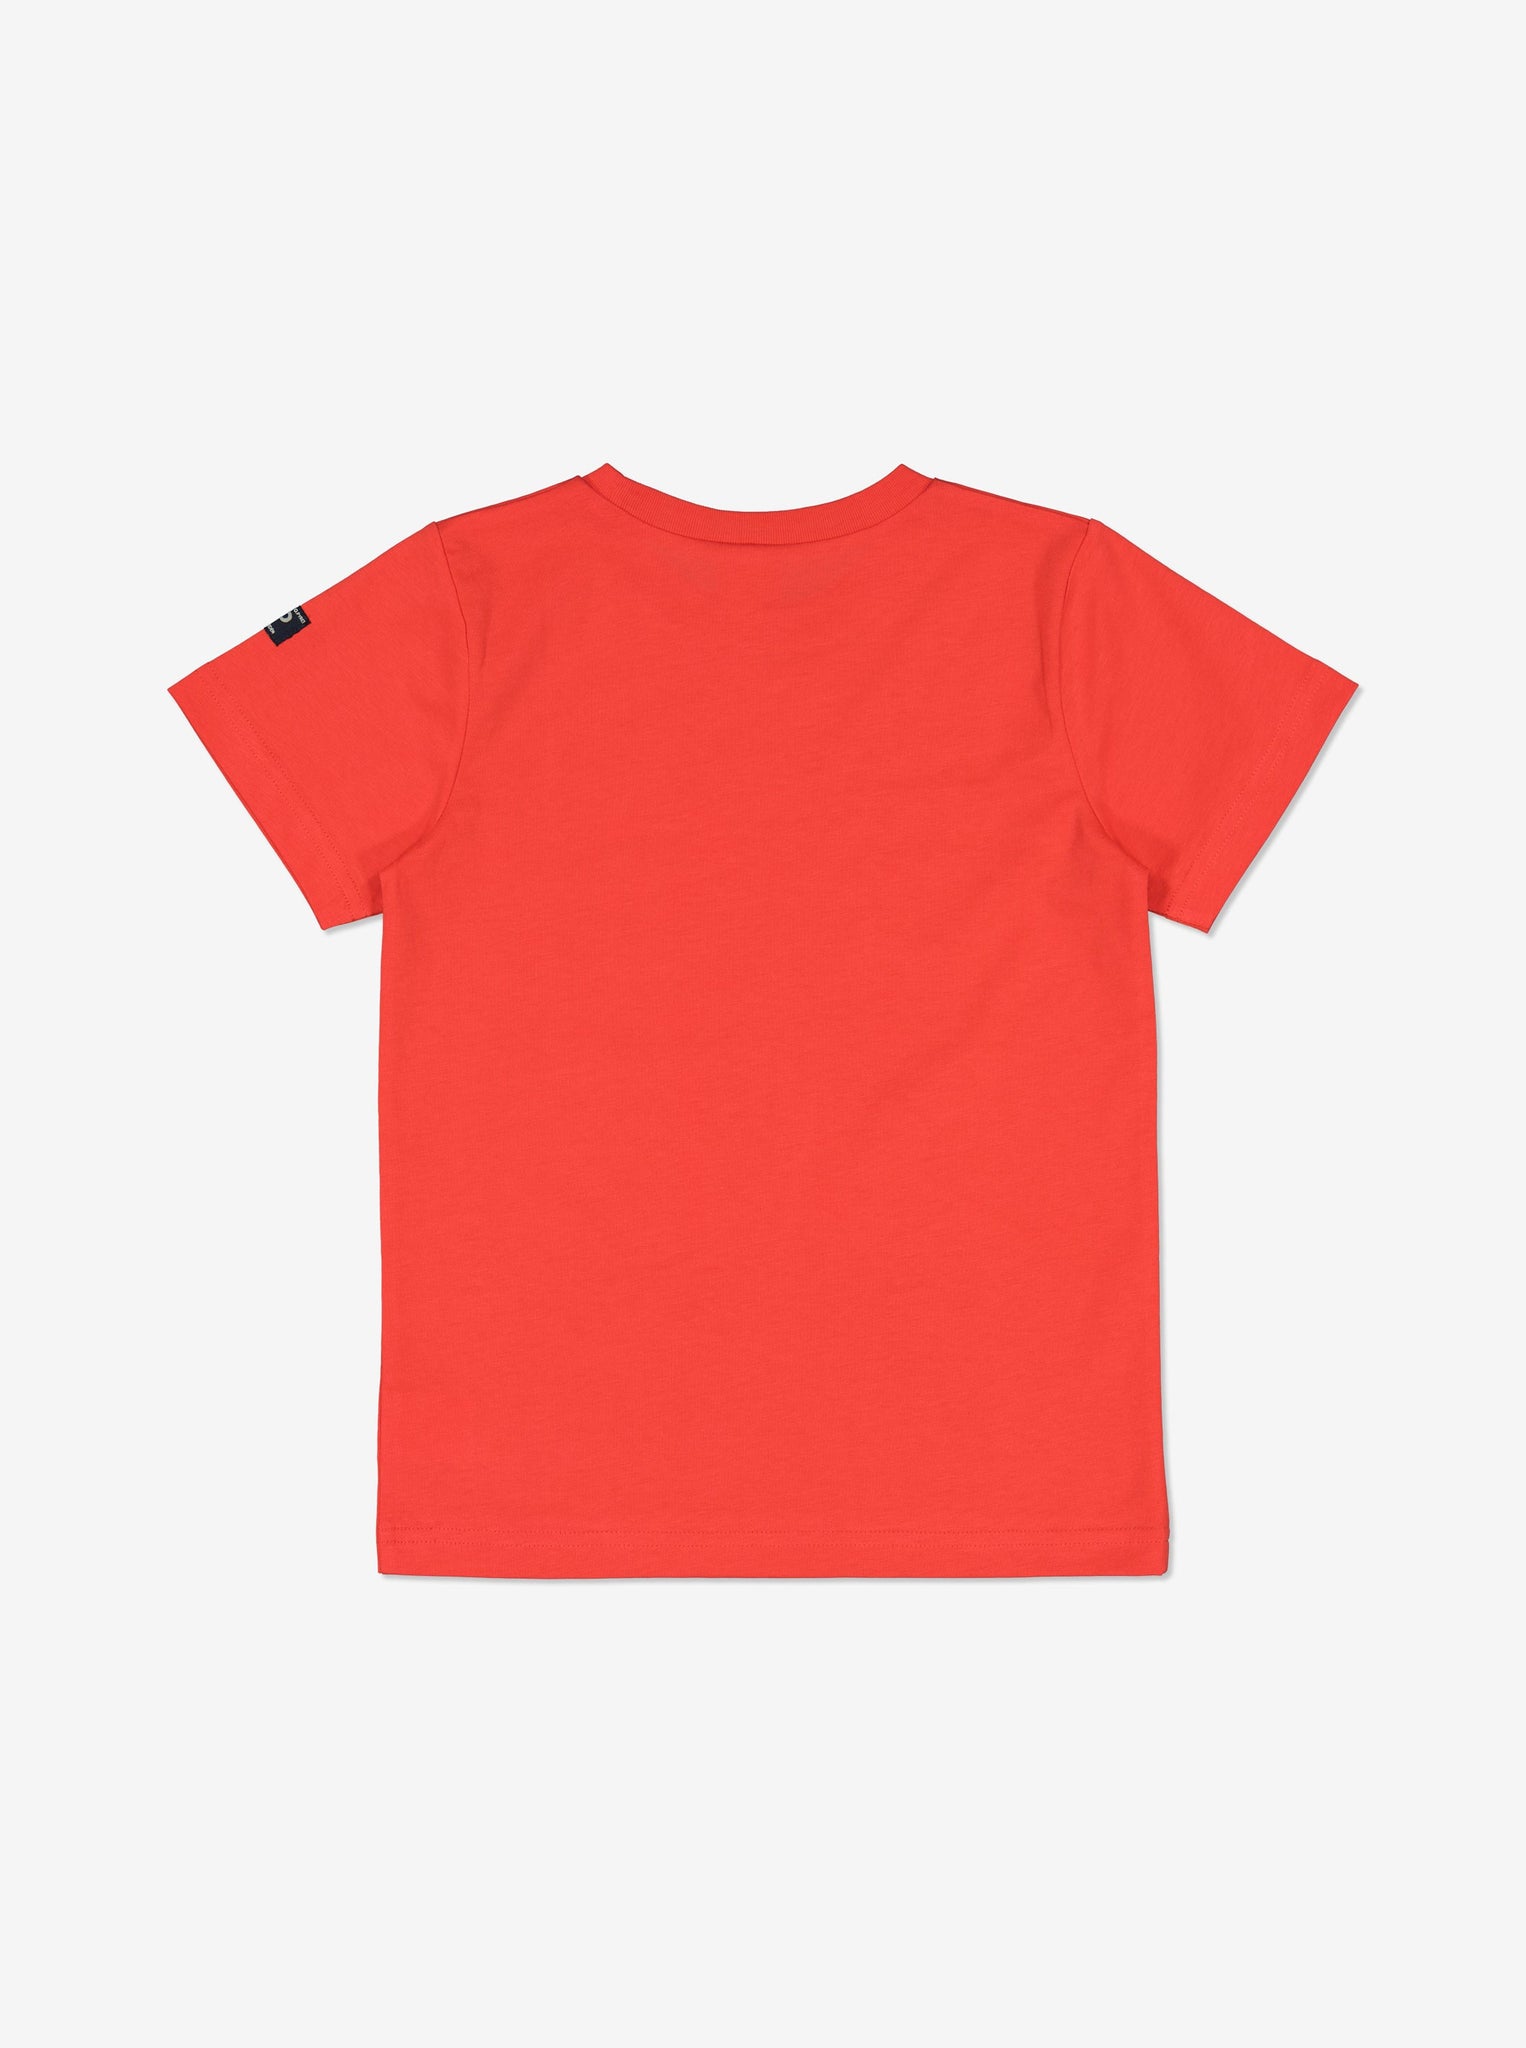 Organic Cotton Red Kids T-Shirt from Polarn O. Pyret Kidswear. Made from 100% GOTS Organic Cotton.